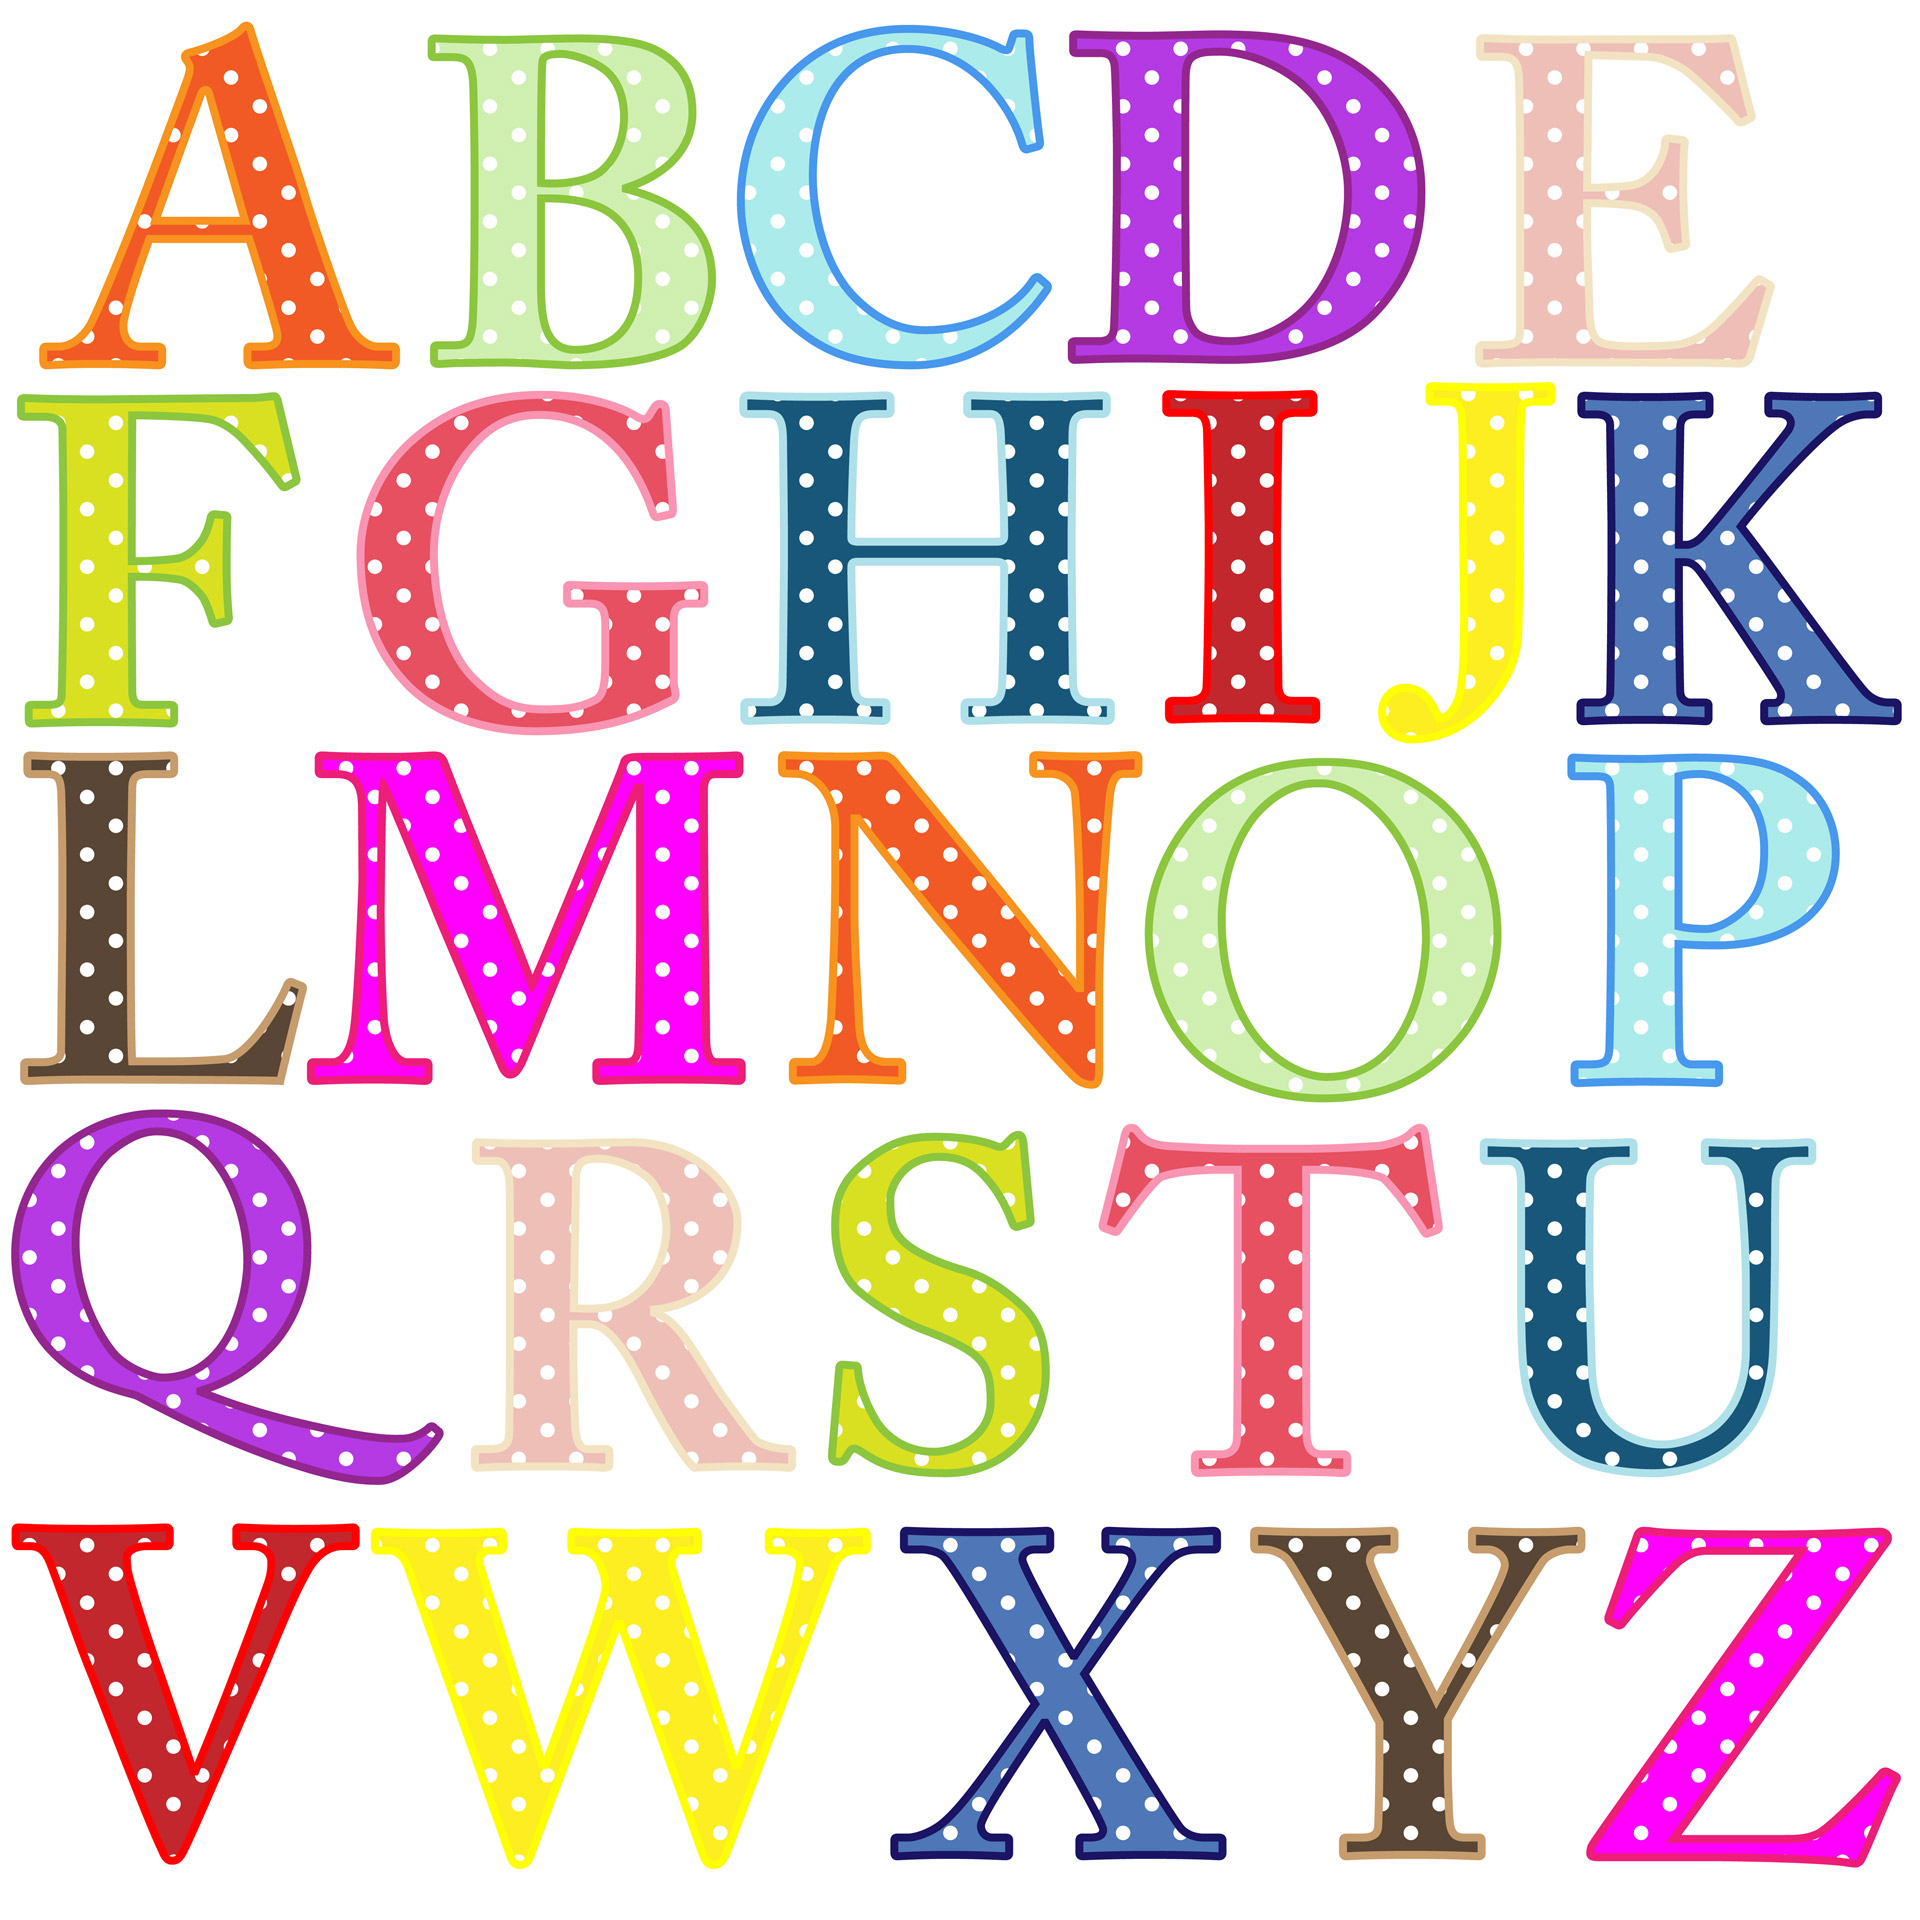 0 images about alphabets on a